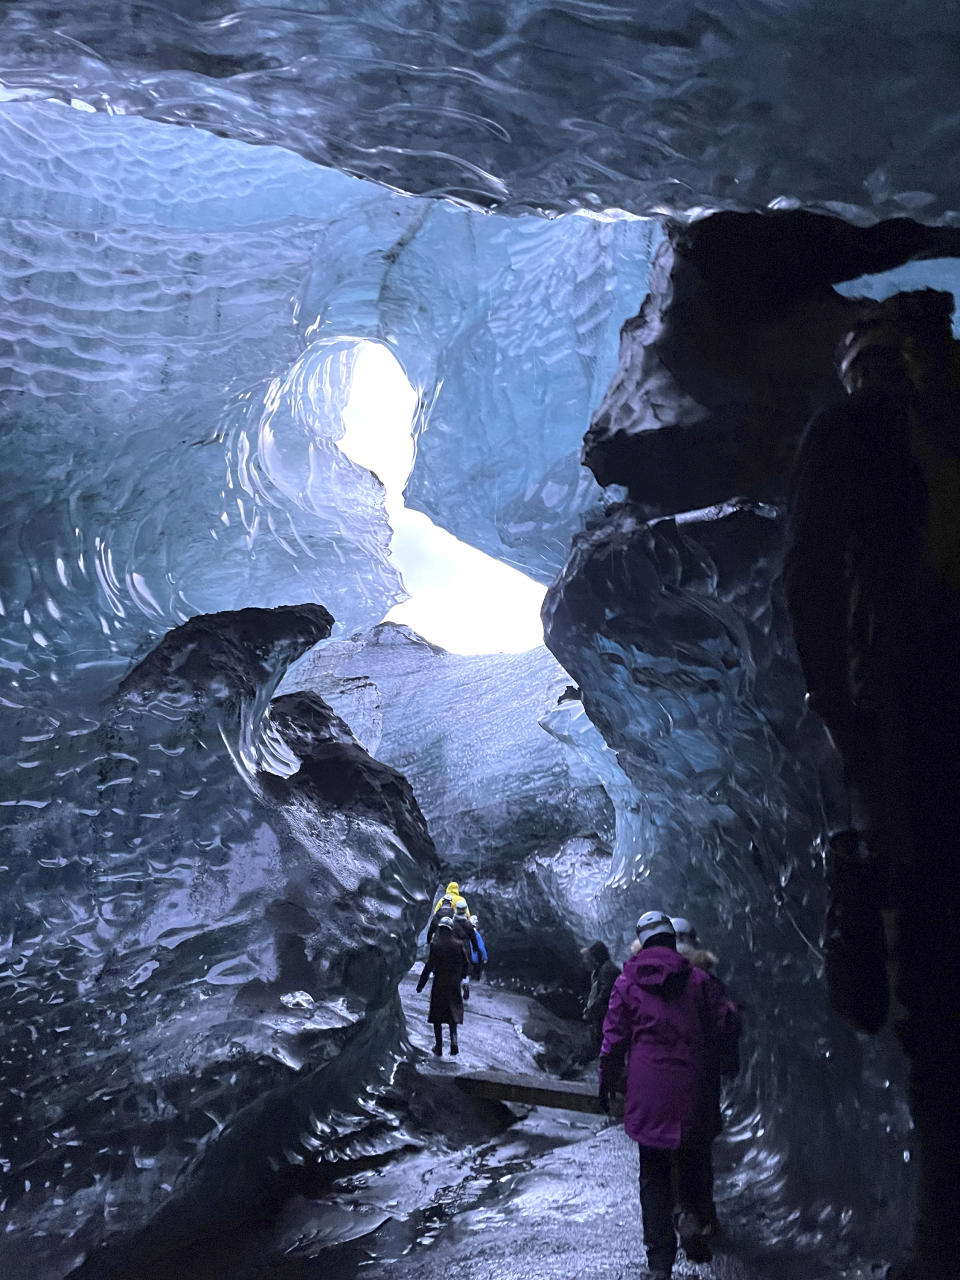 This Nov. 18, 2023 image provided by Beth Harpaz shows visitors walking through an ice cave at Vatnajokull National Park, located on an ice field in southeastern Iceland. The caves can only be explored on a tour with a registered guide. Winter crampons must be attached to shoes and boots for traction to avoid slipping. (Beth Harpaz via AP)